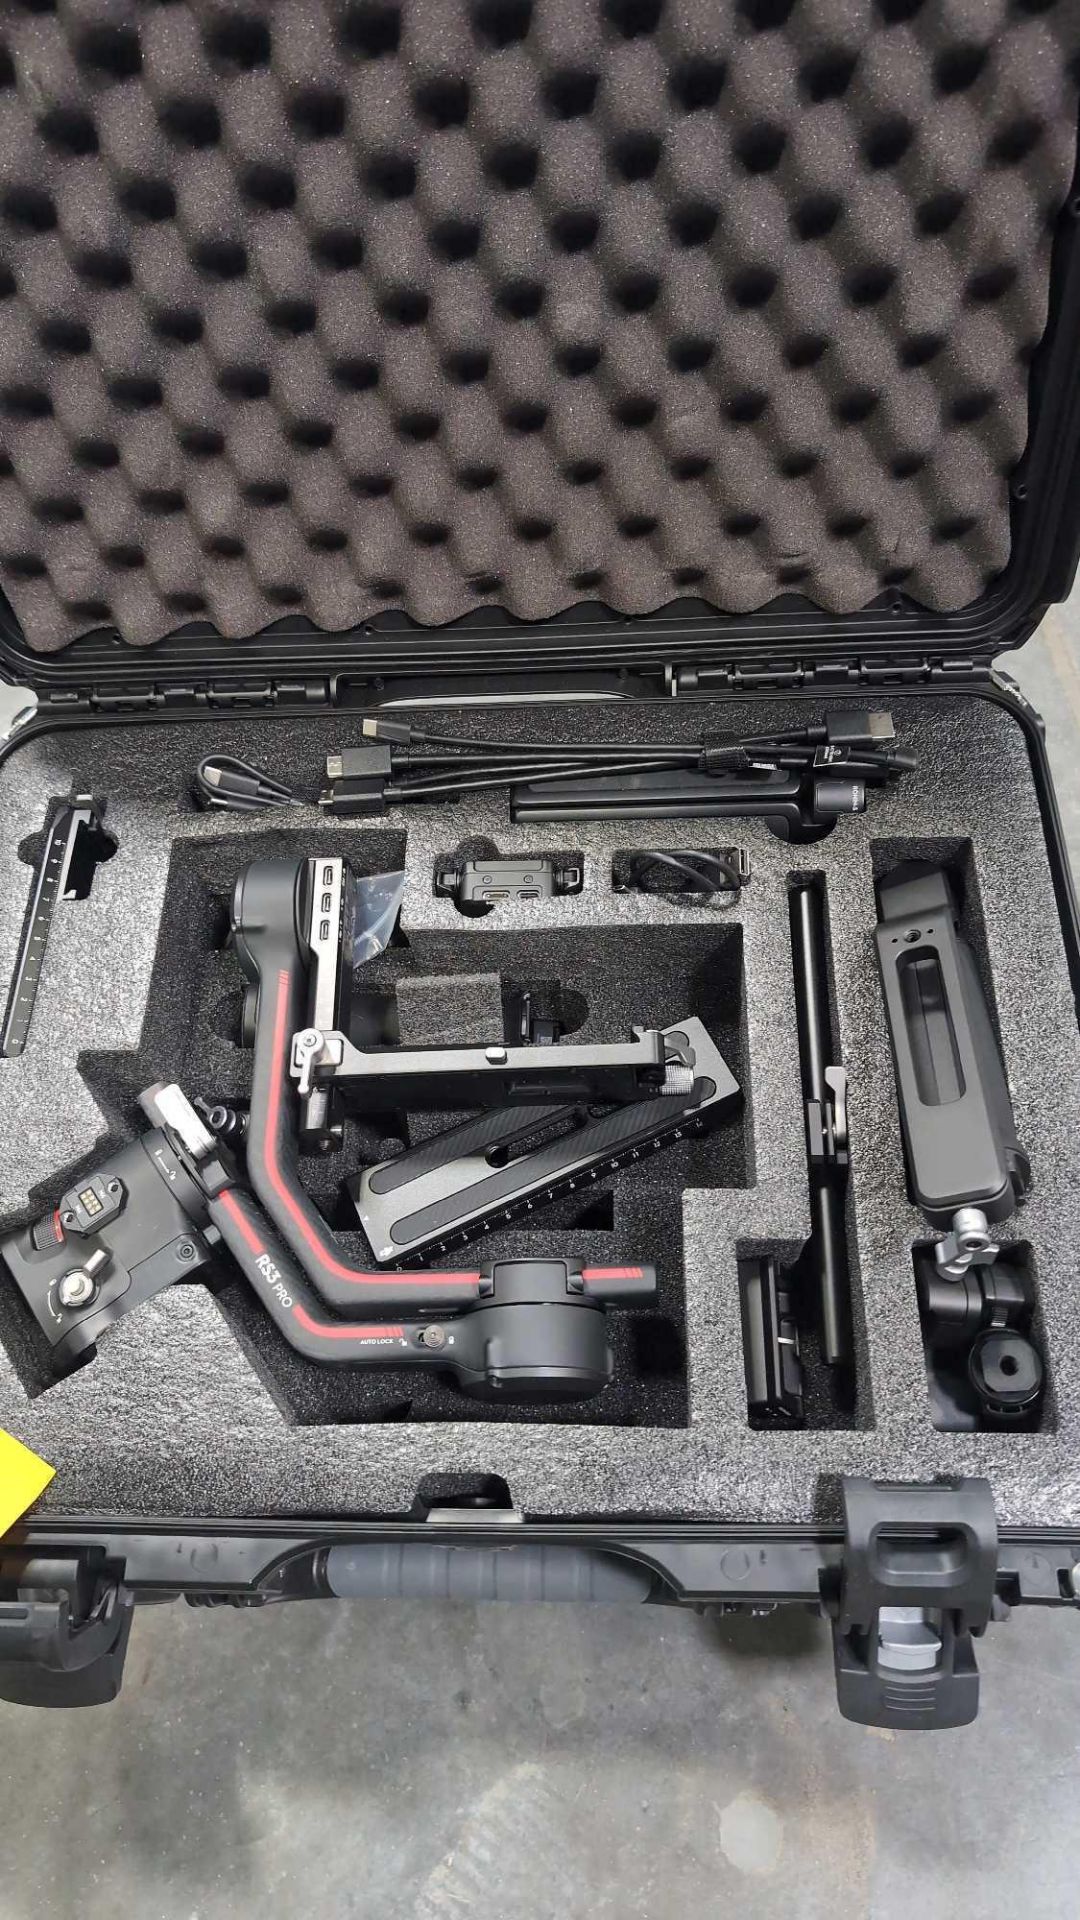 DJI Ronin rs3 pro with case - Image 4 of 4